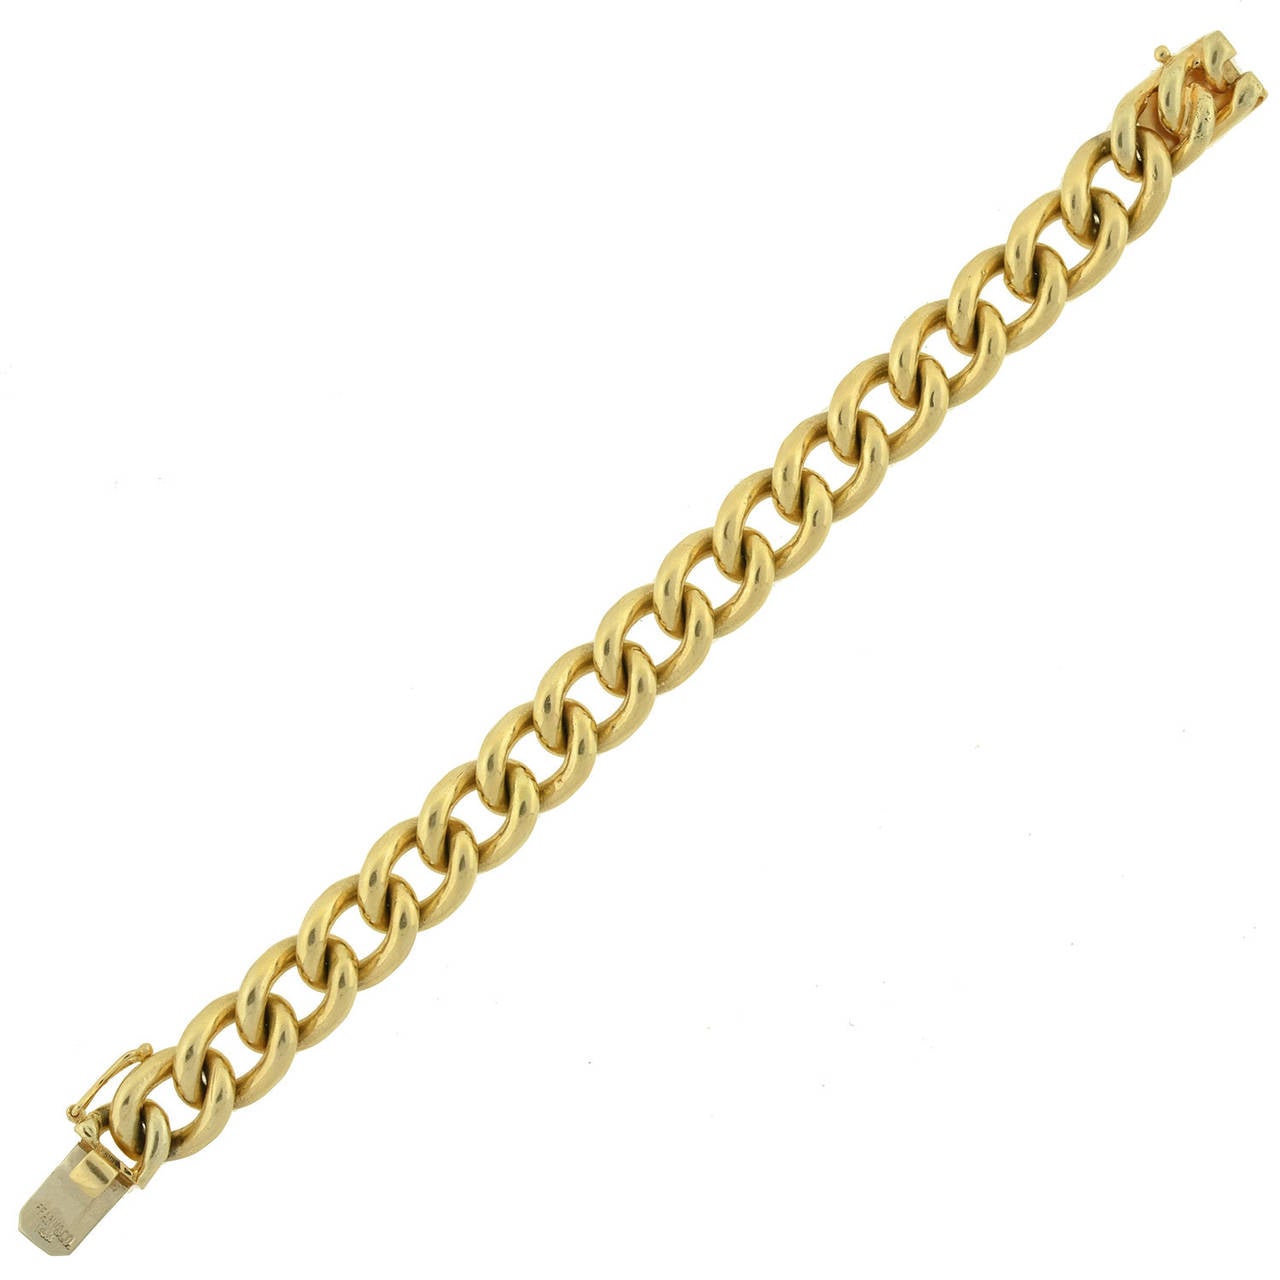 This fabulous gold bracelet is a signed estate piece by Tiffany & Co.! The 14kt gold bracelet is comprised of heavy Cuban links, forming a stylish gold chain that wraps around the wrist. Hidden within the links is a secure push clasp, stamped